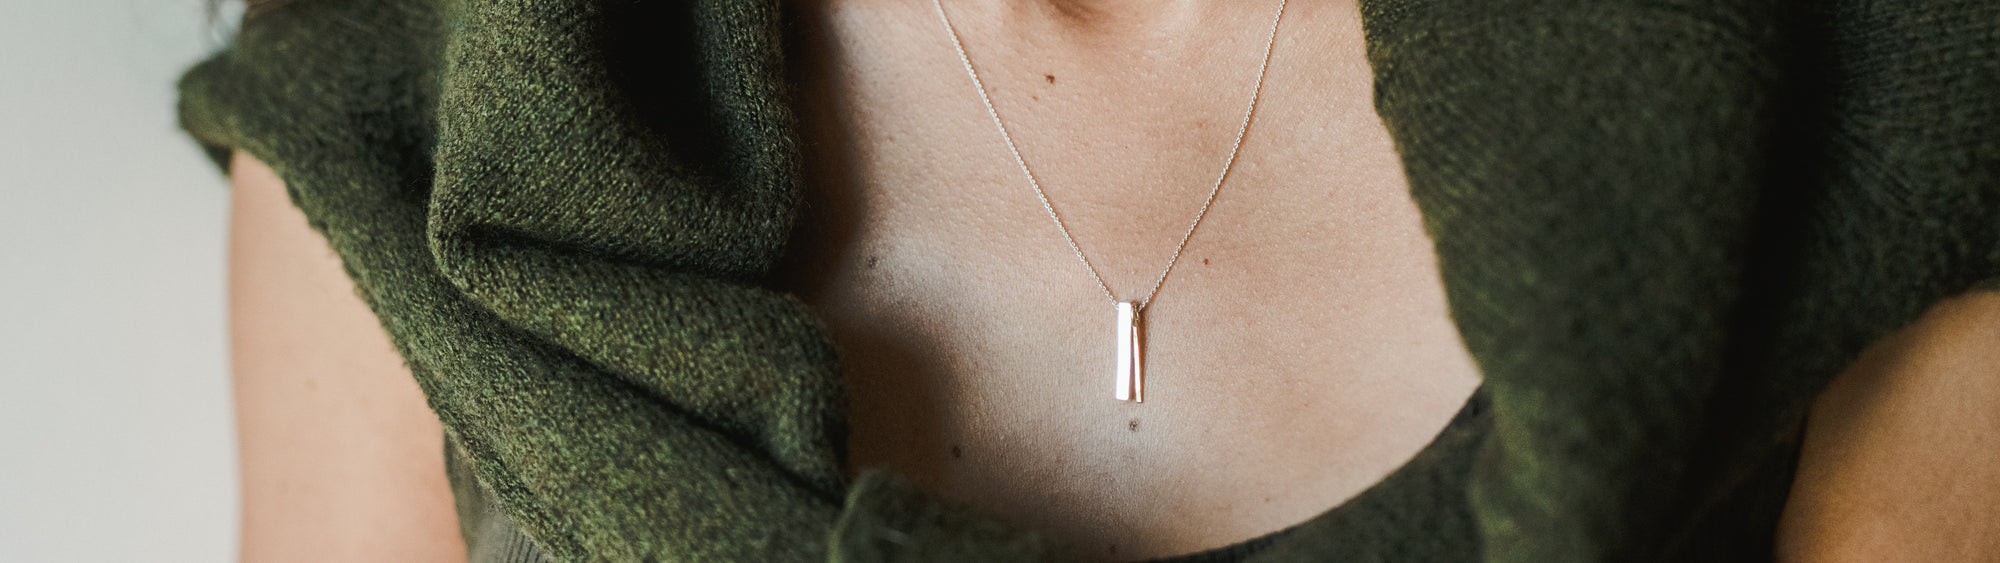 A close-up view of a person wearing a simple bar pendant necklace.